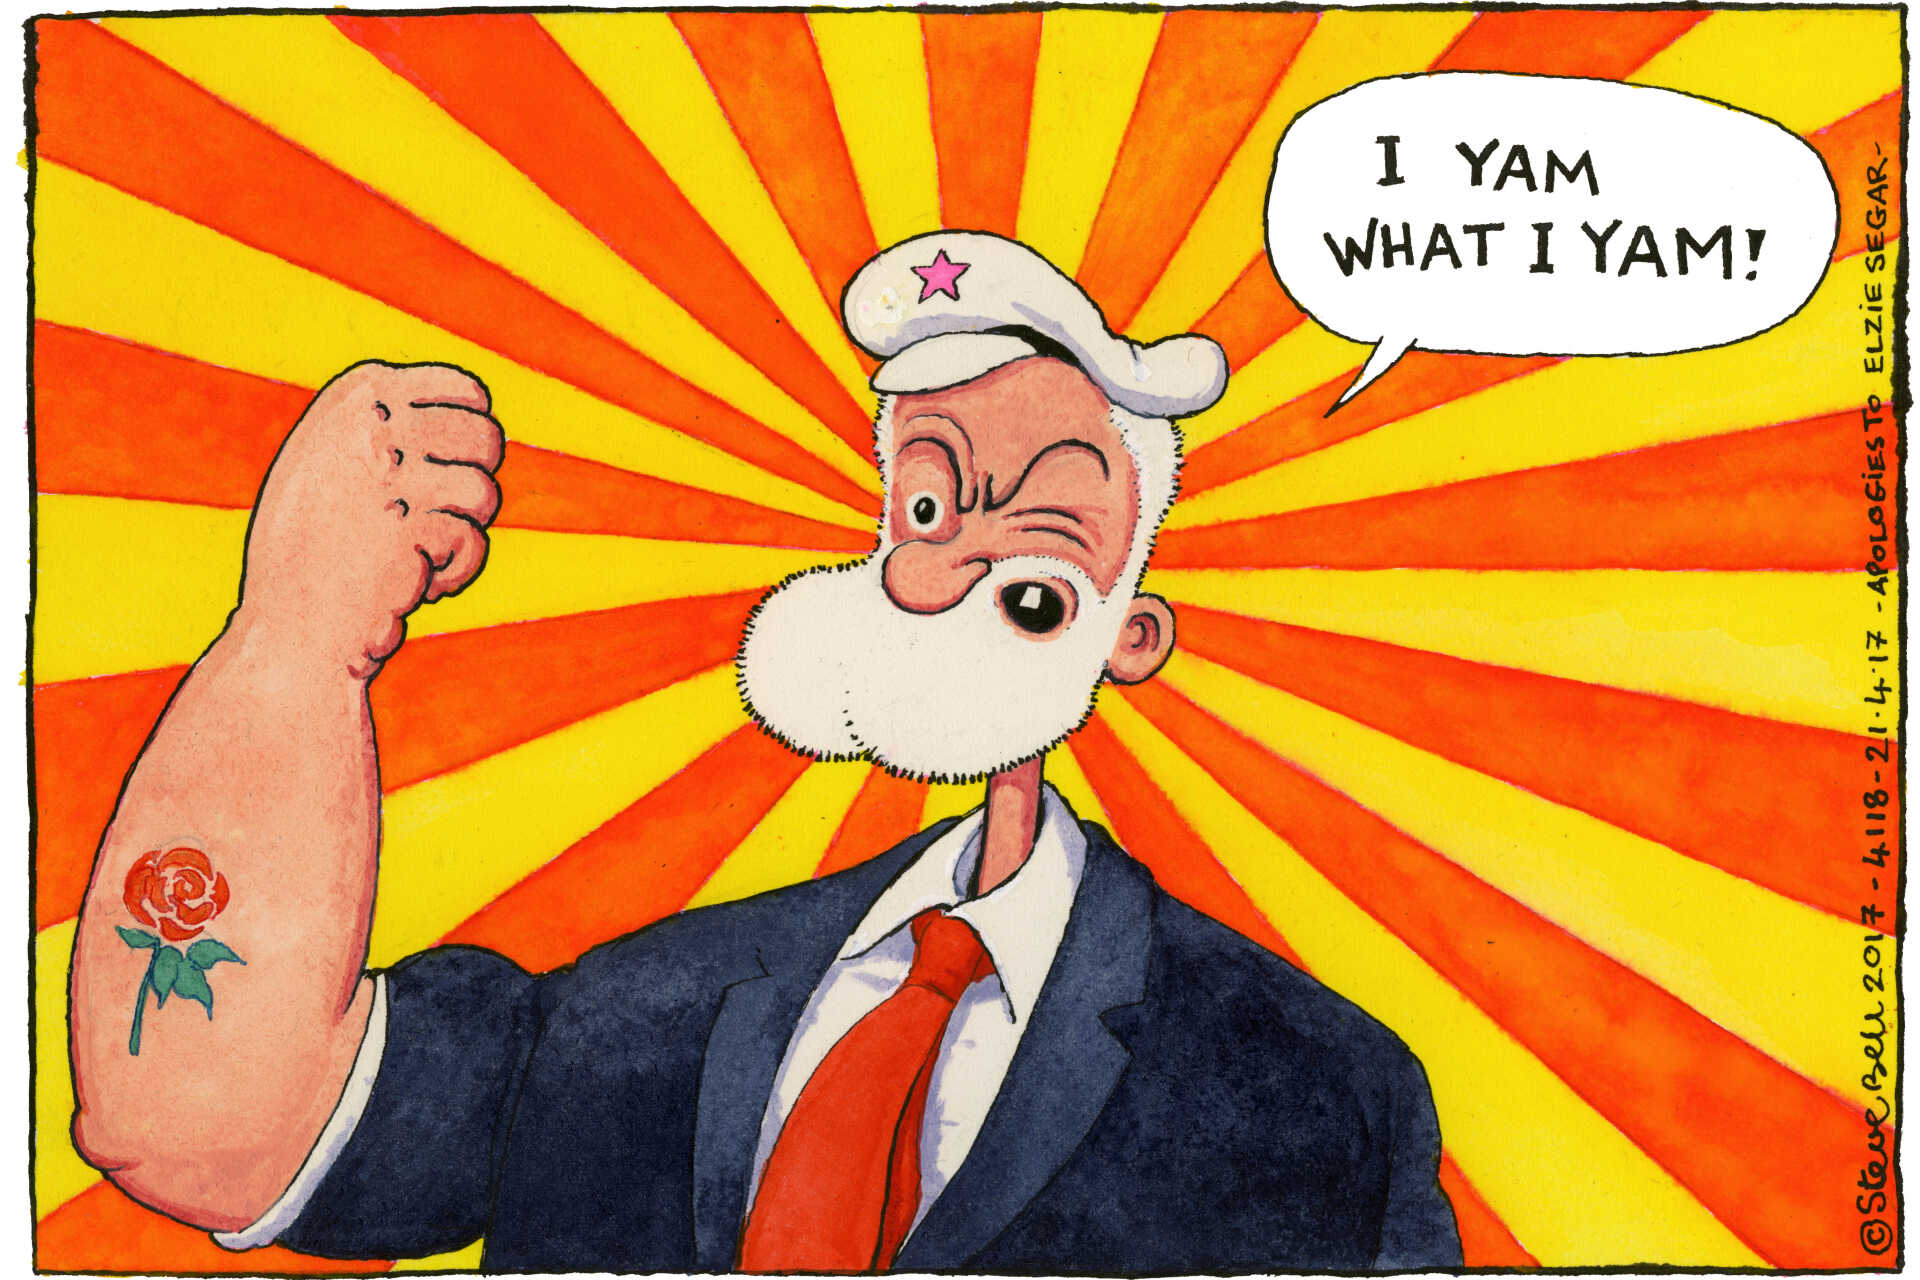 Cartoon "I yam what I yam!" by Steve Bell, 21 Apr 2017, published in the Guardian. Depicting Jeremy Corbyn as Popeye.